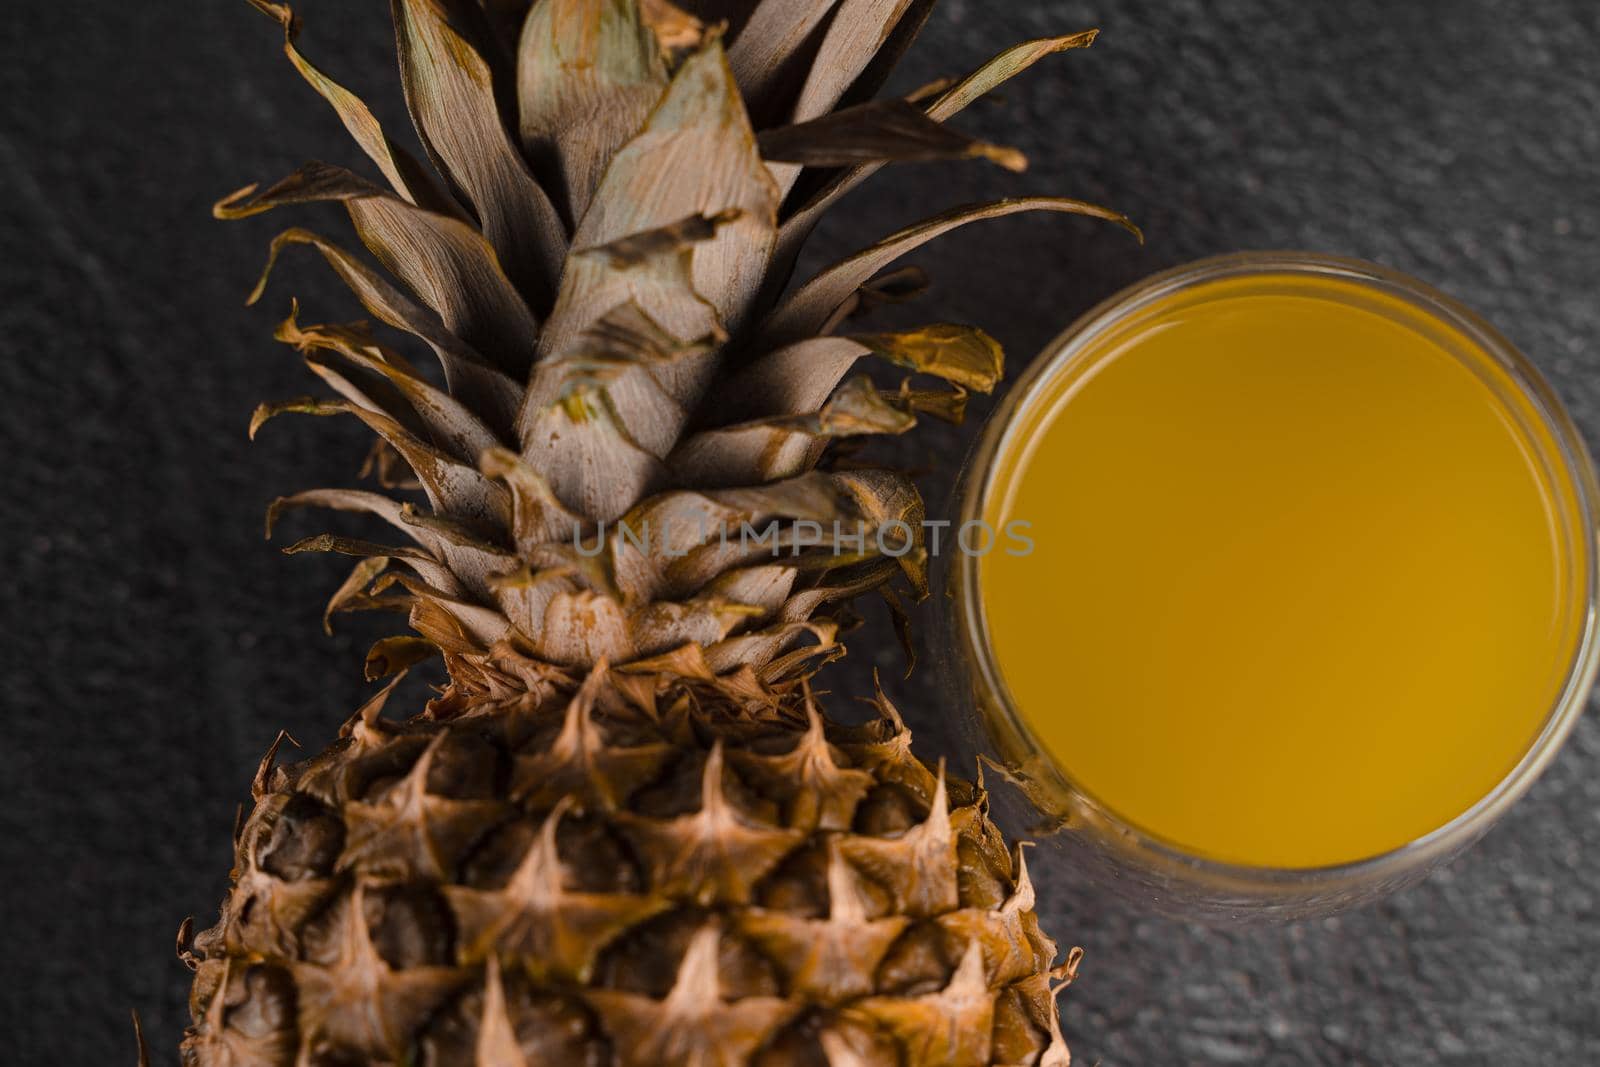 Pineapple fruit and juice in double glass cup on black stone background. Pouring yellow tropical fruit juice into glass.